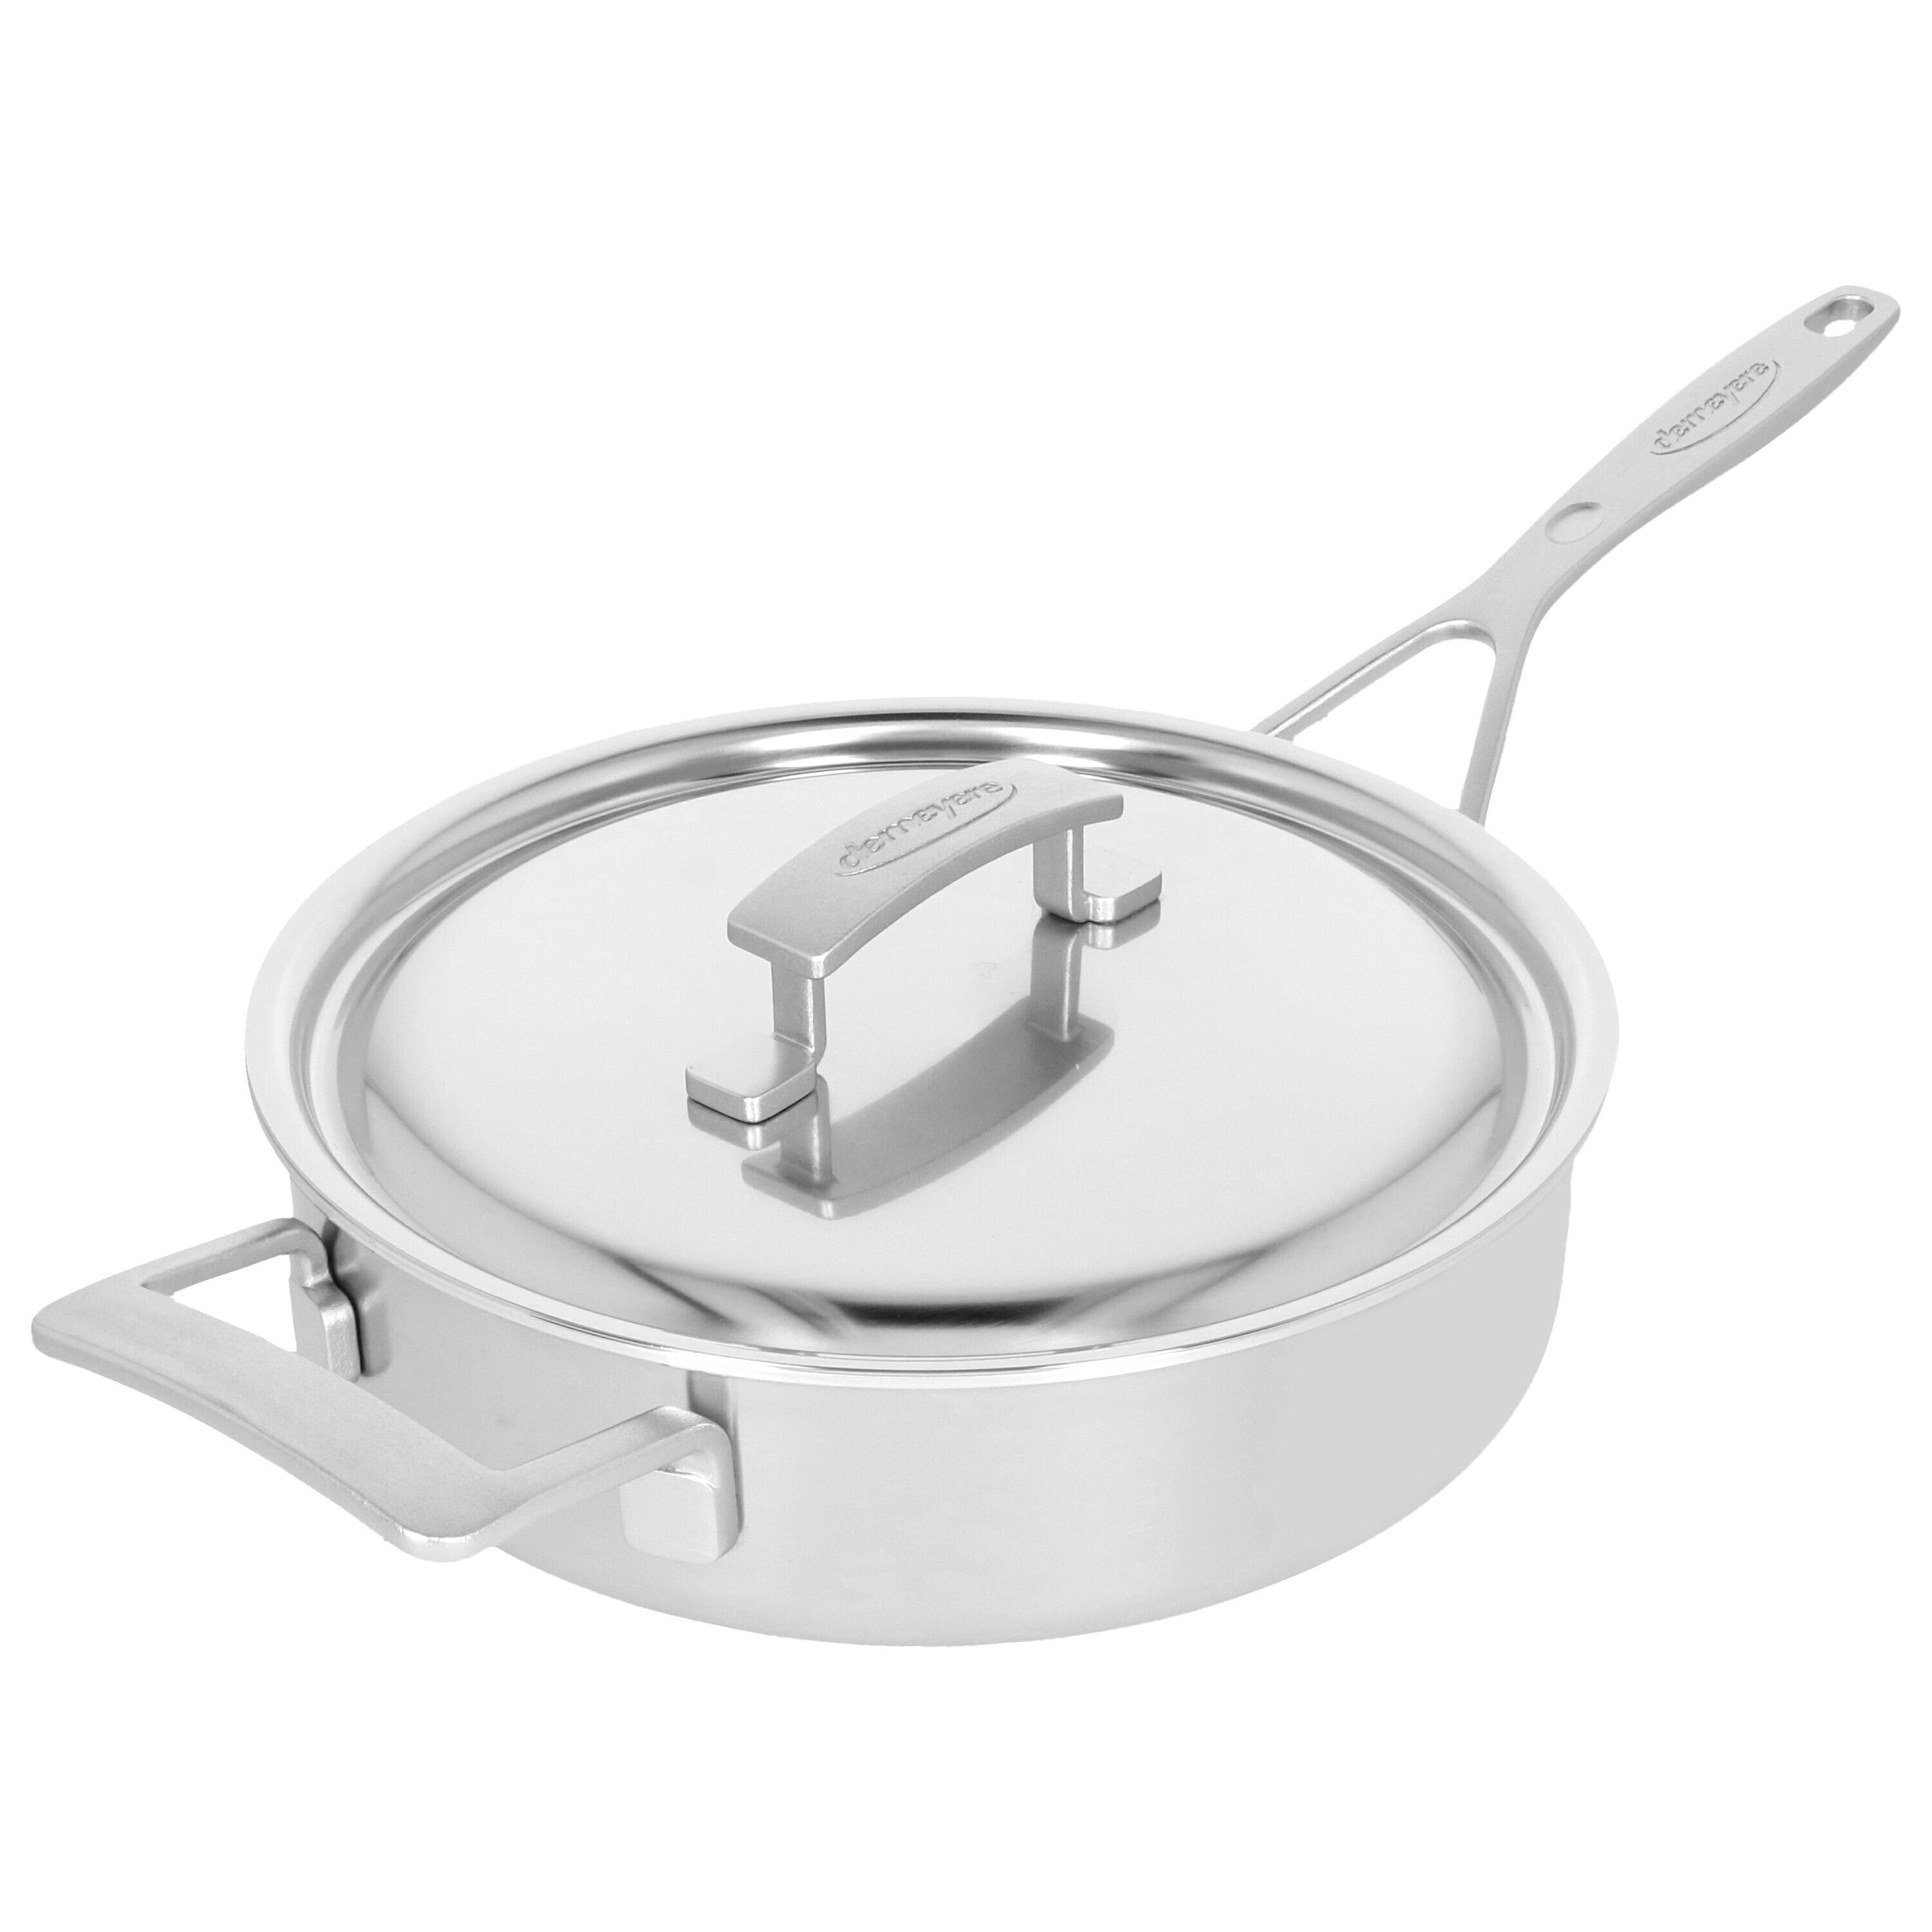 Is Hestan Cookware Worth It? In-Depth Review (With Test Results)